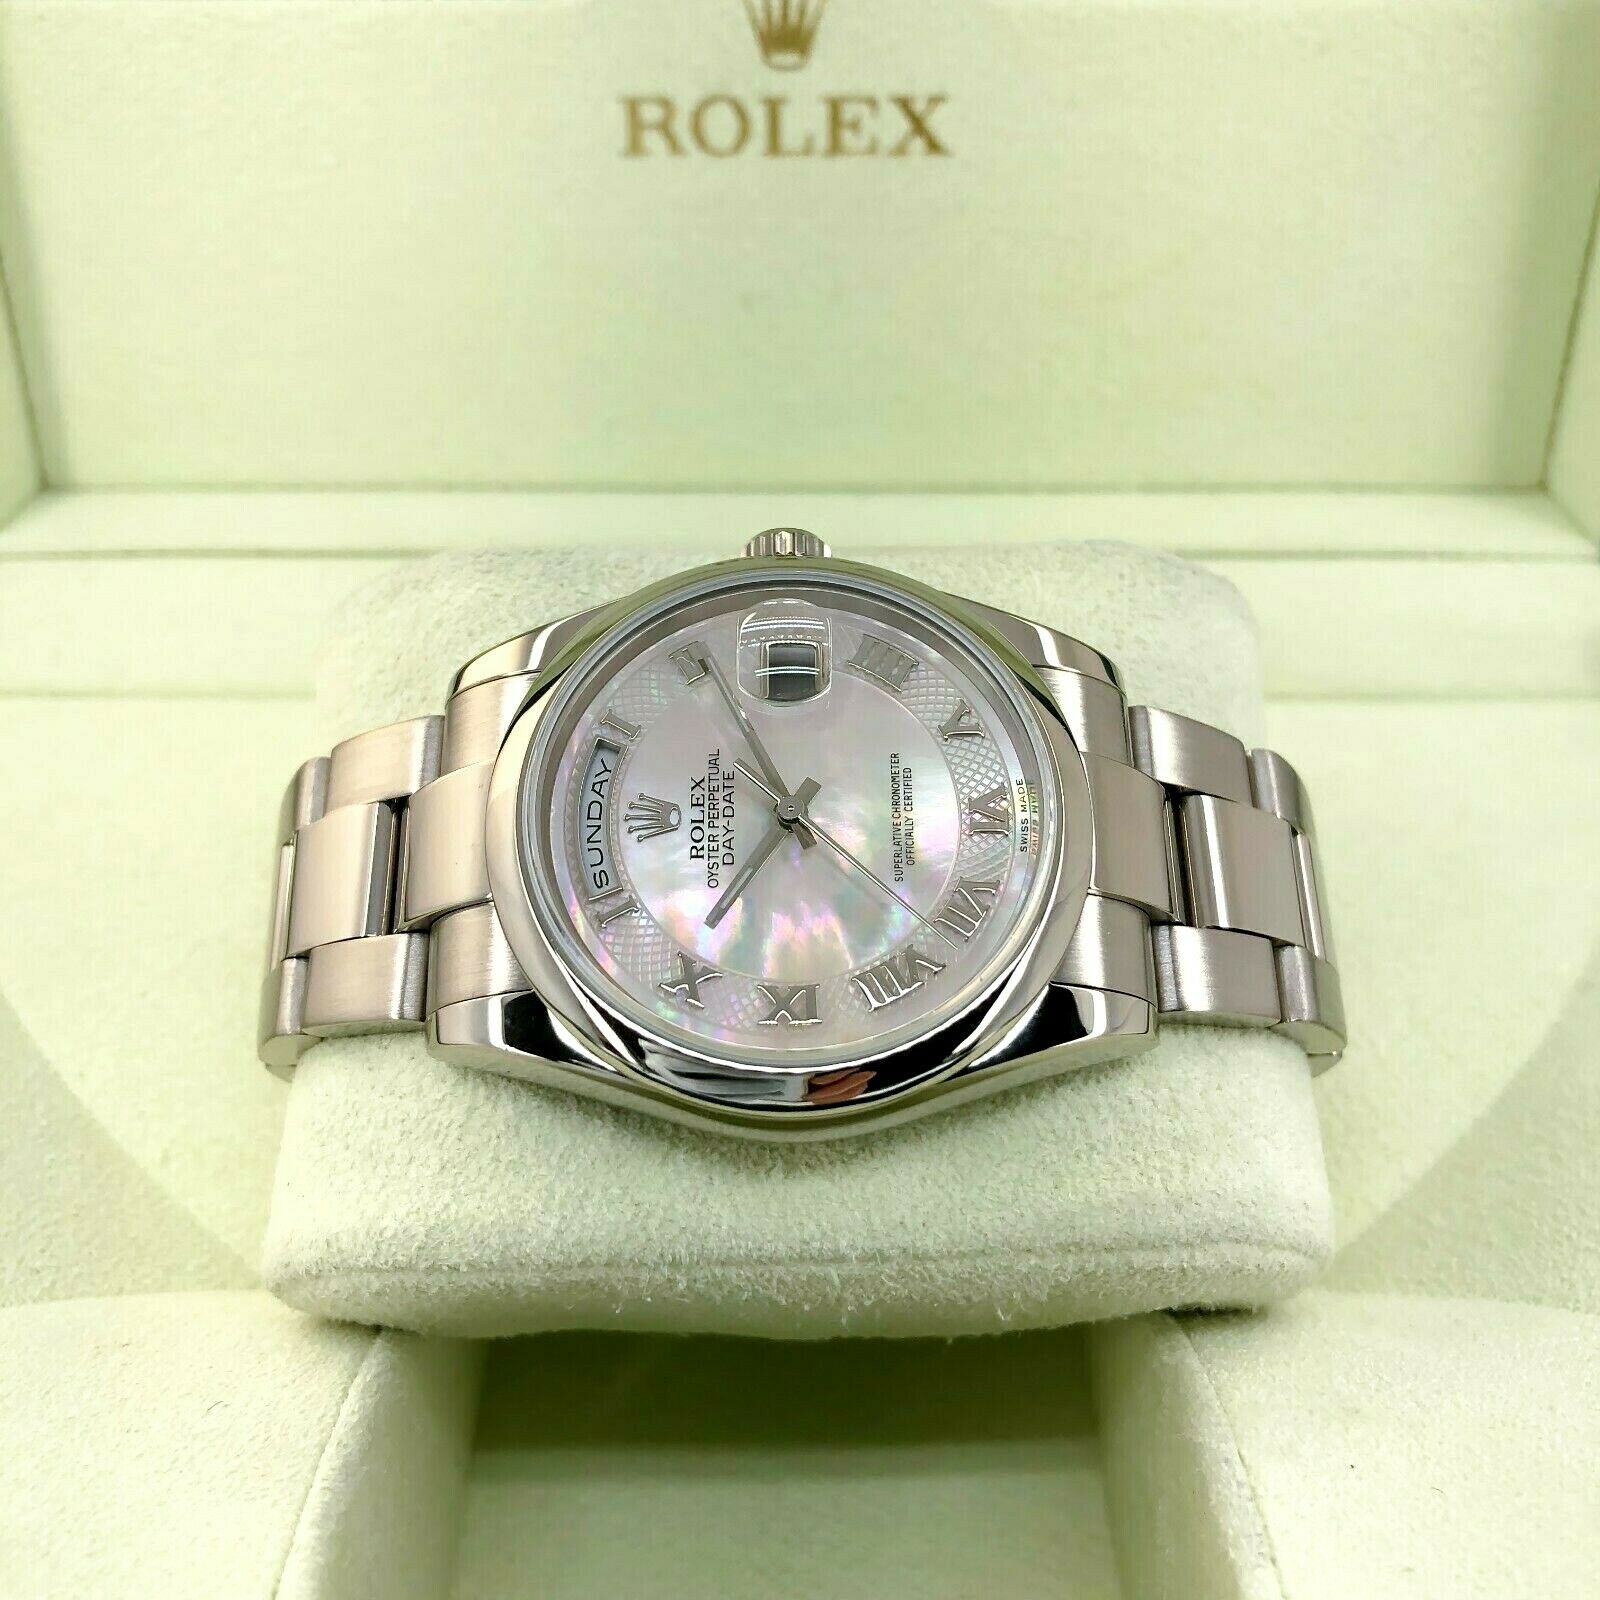 Rolex Day Date President 18K White Gold 36mm Watch 118209 DQ Set Factory MOPDial